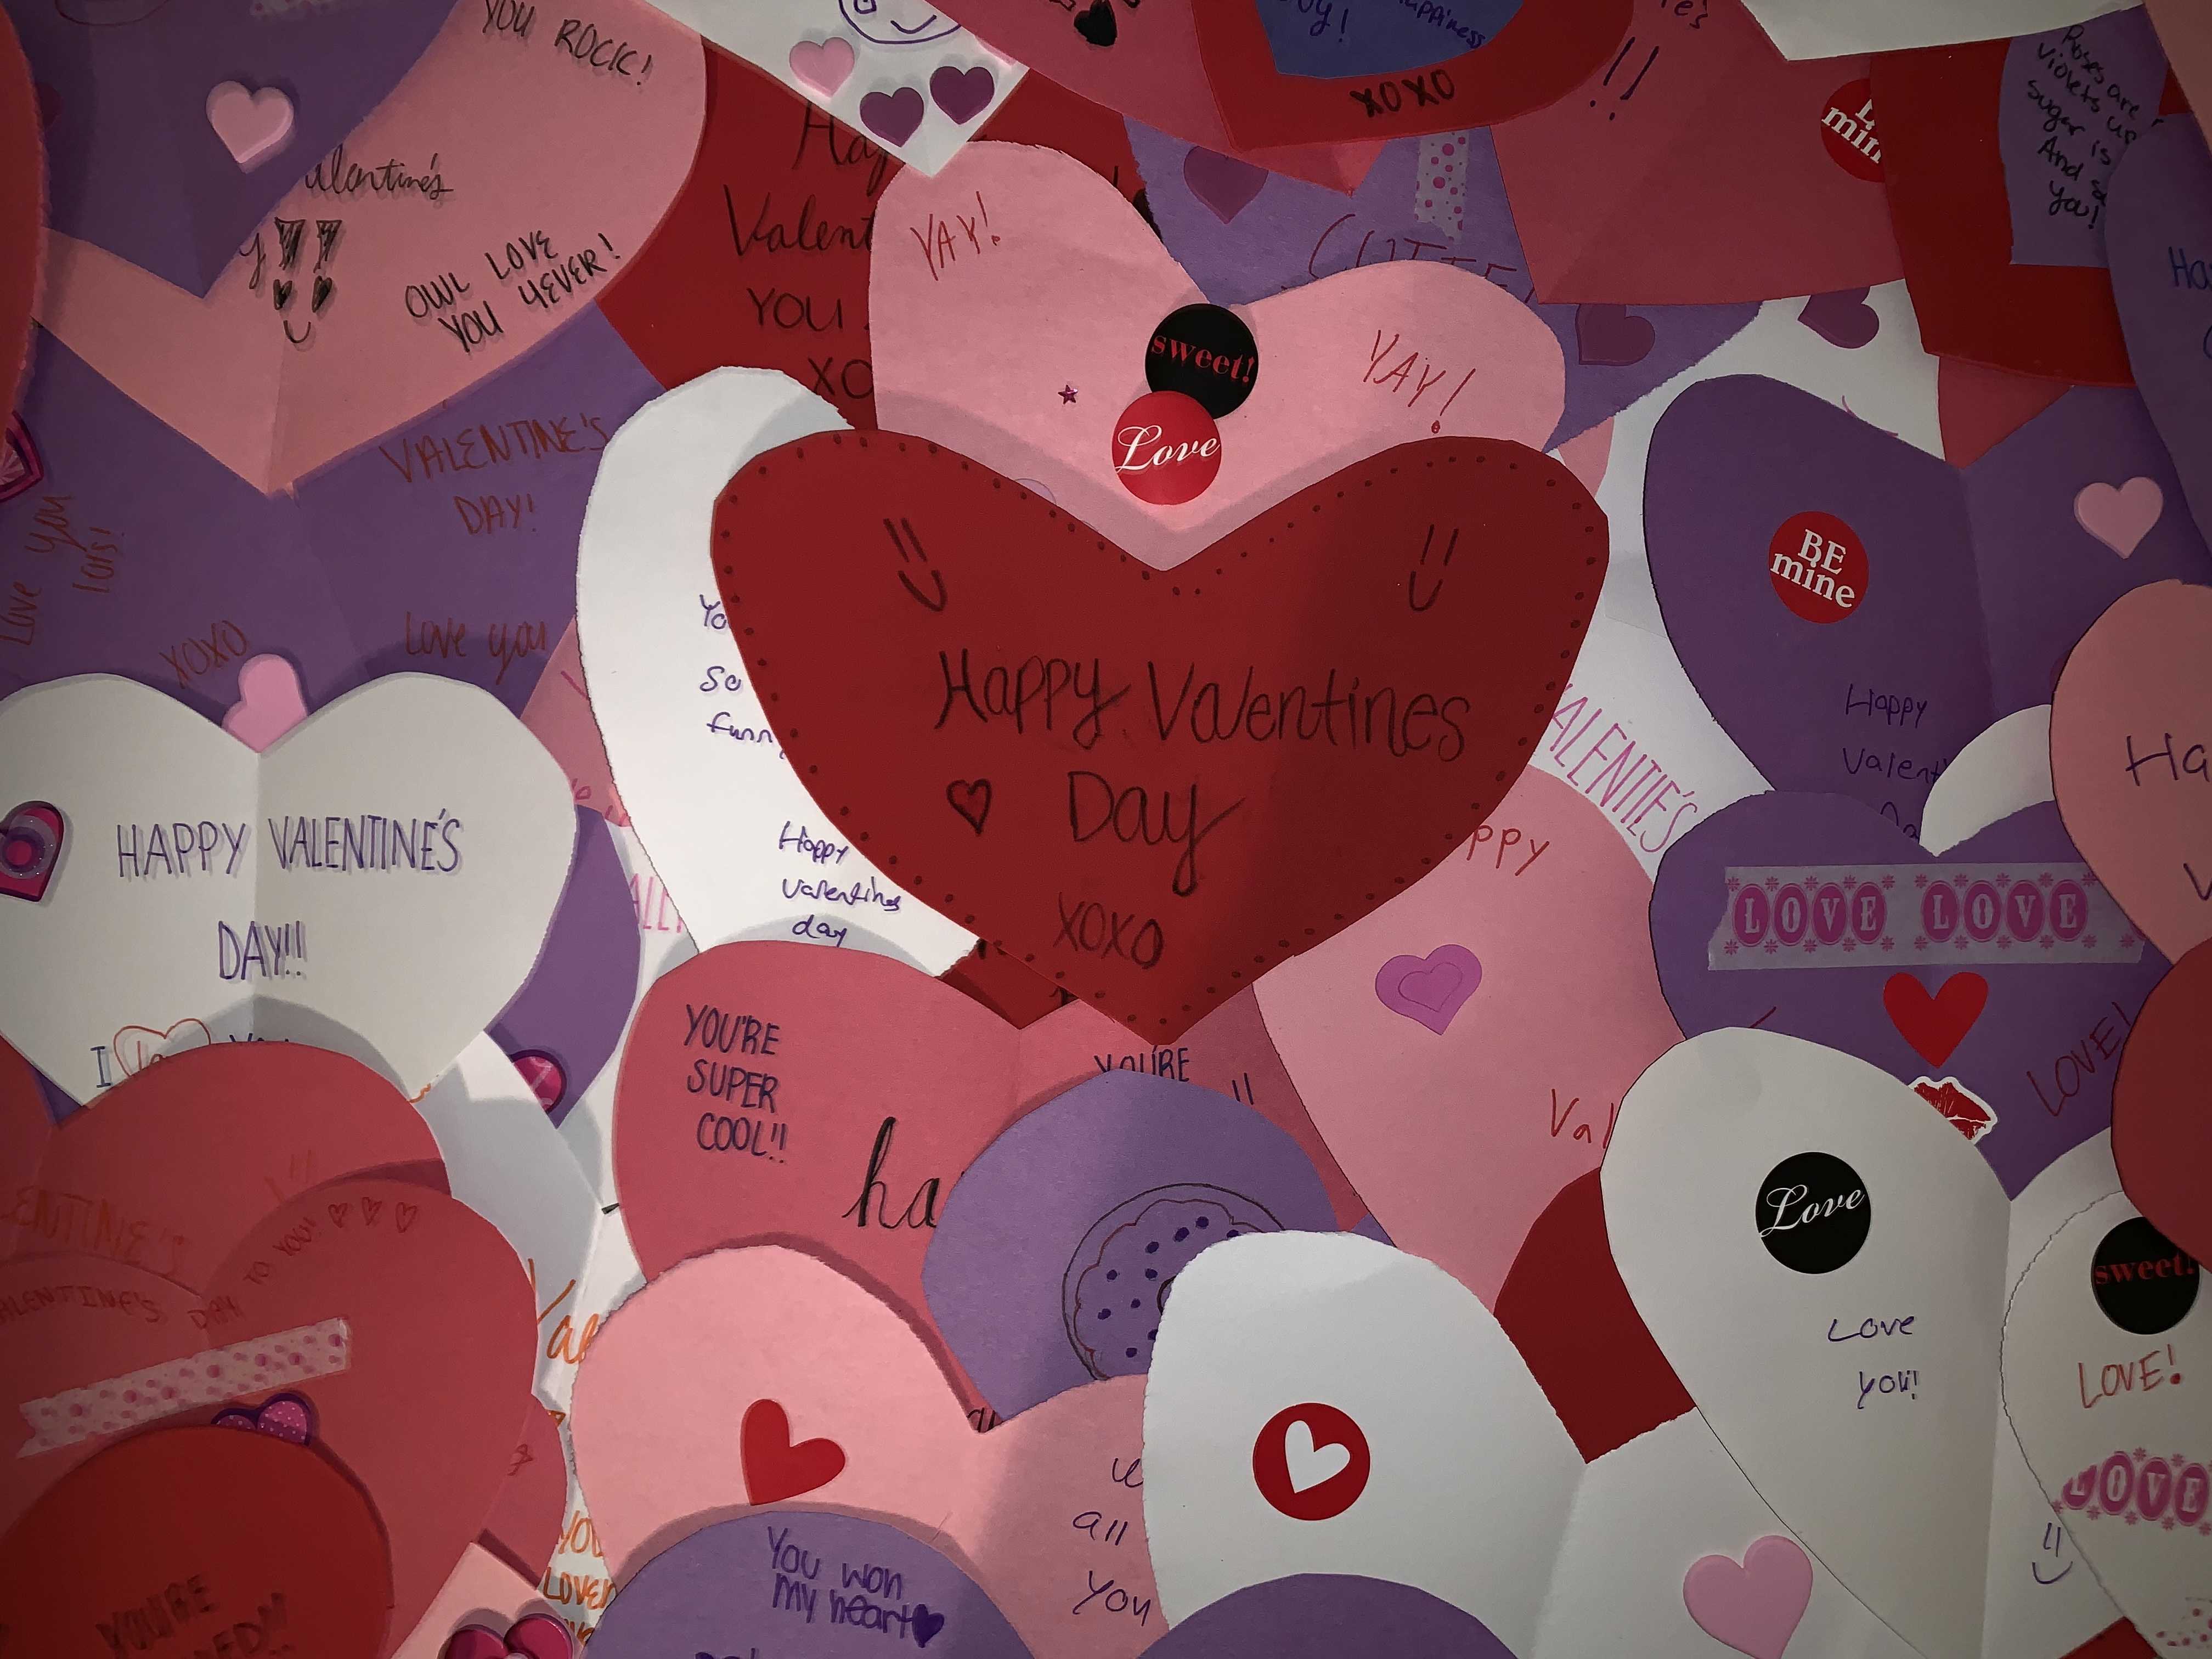 fbla-members-make-and-deliver-valentine-s-day-cards-to-senior-citizens